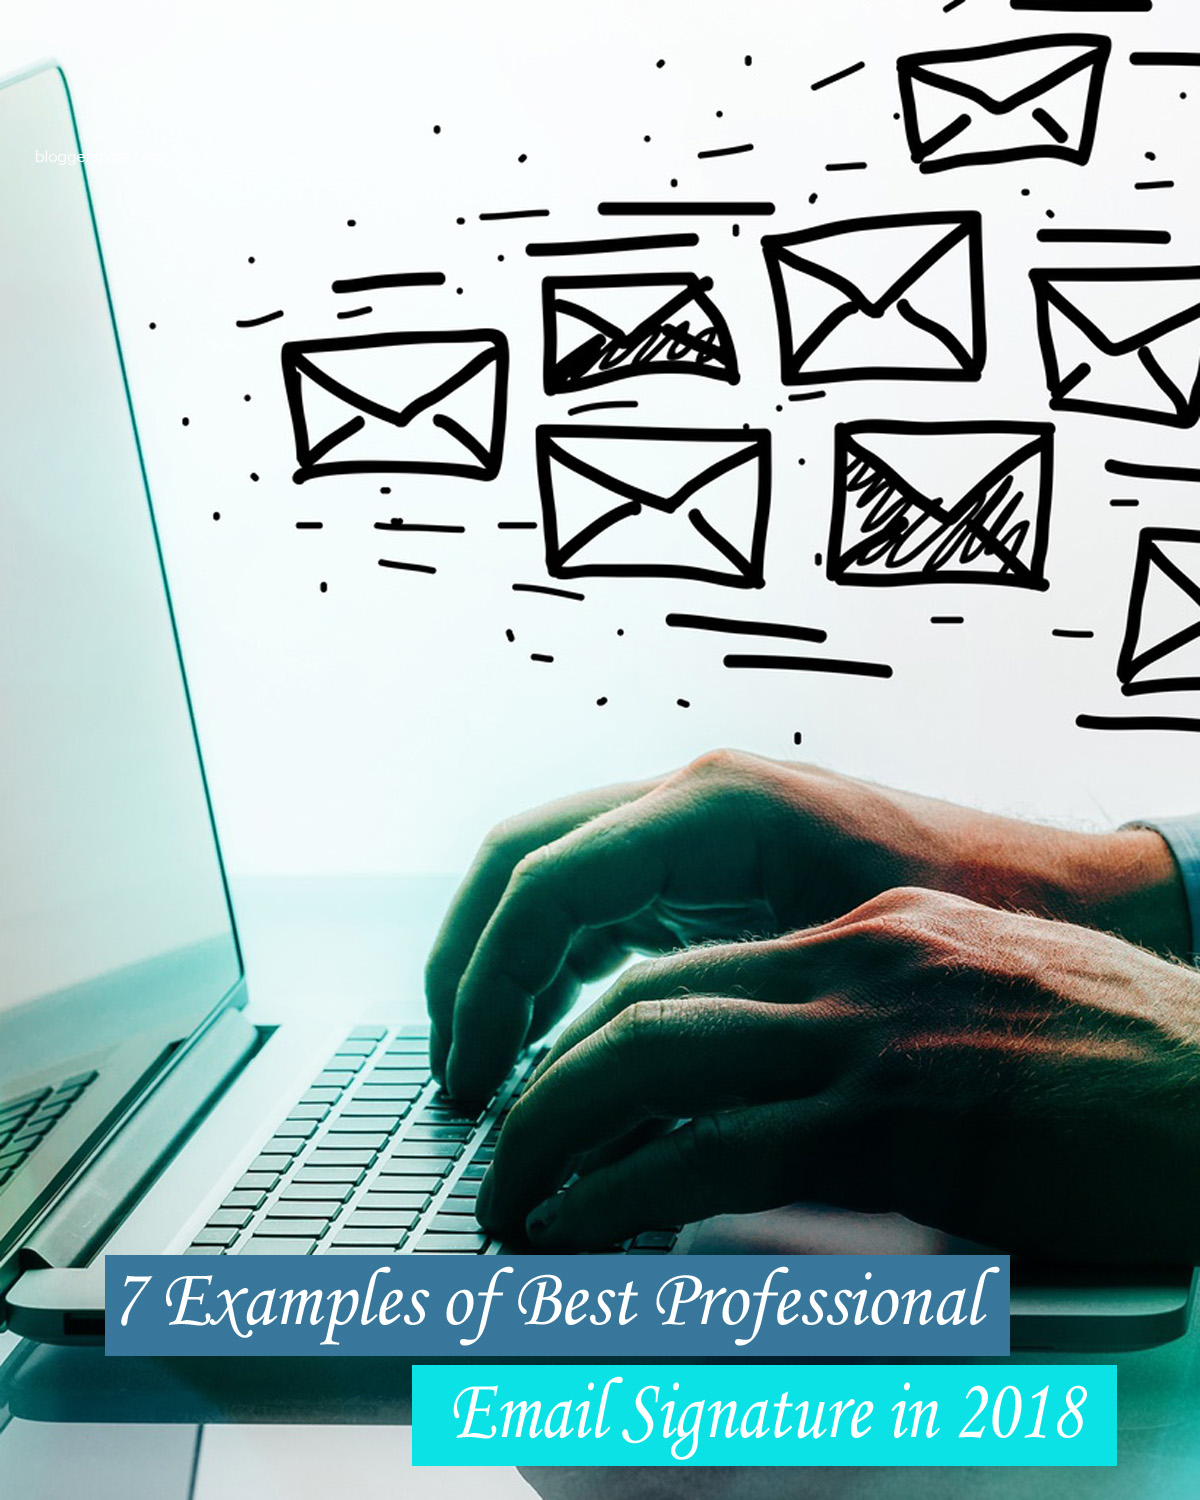 7 Best Professional Email Signature Examples